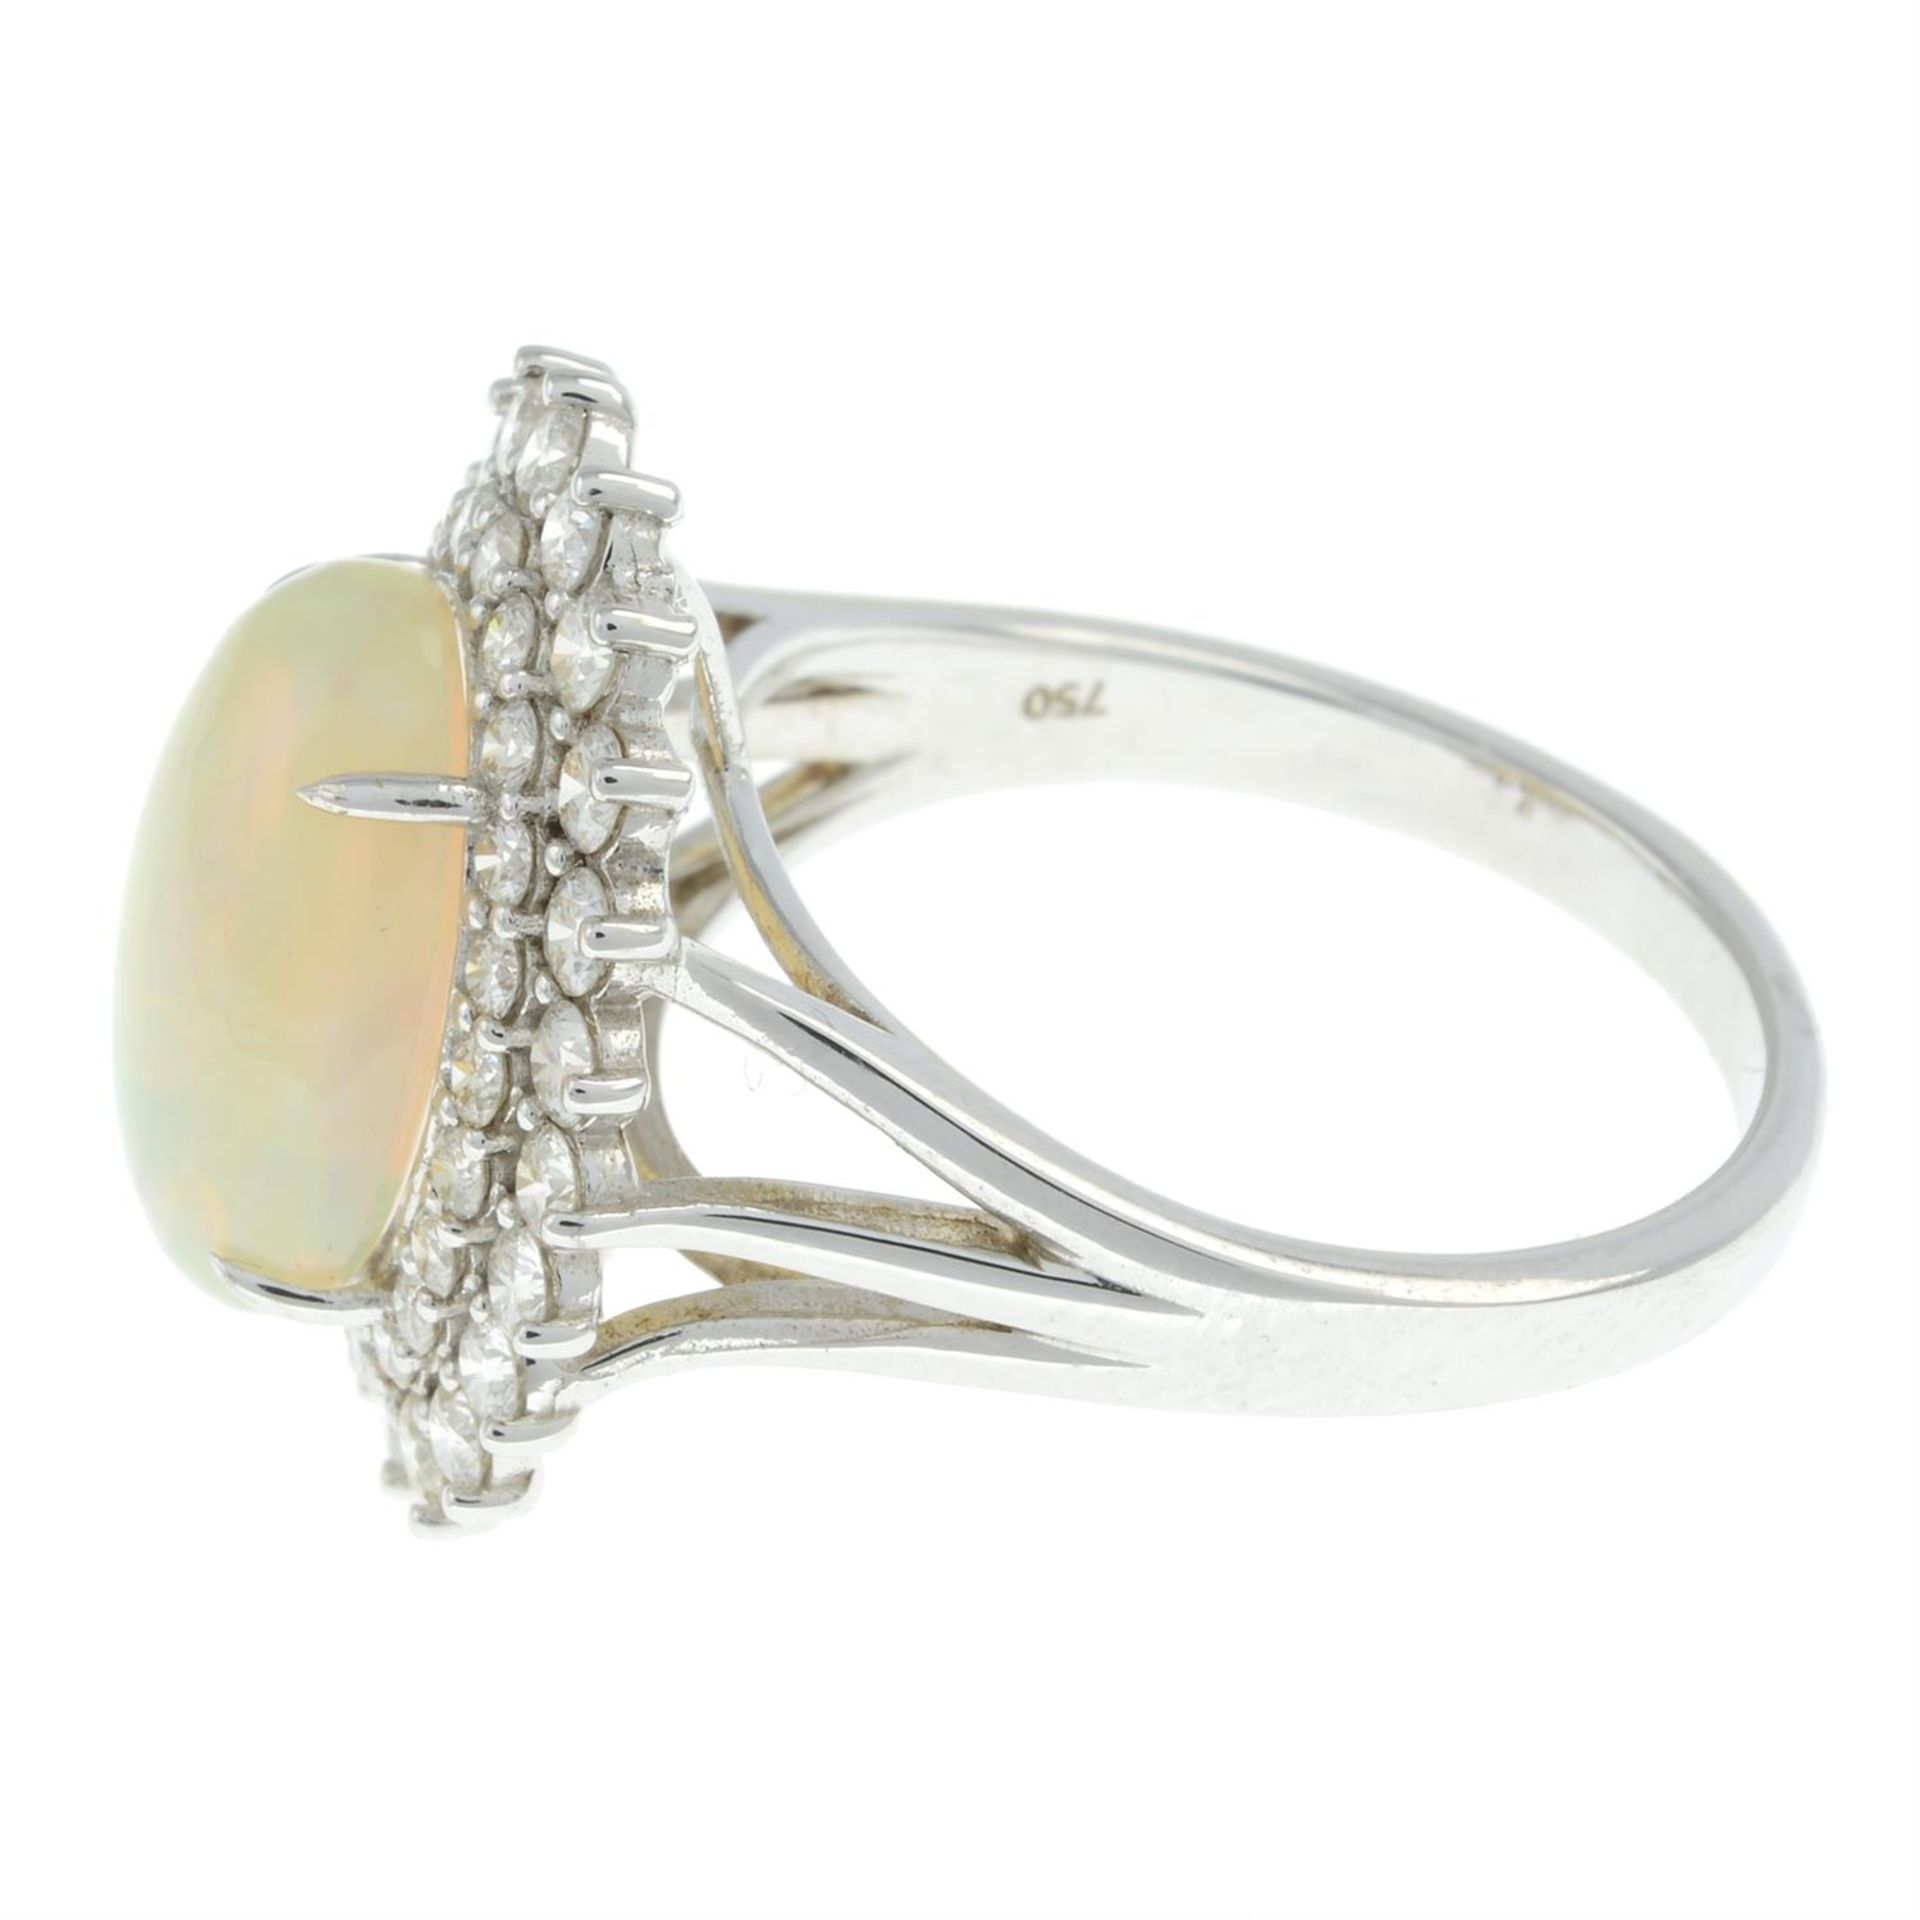 Opal and diamond ring - Image 4 of 5